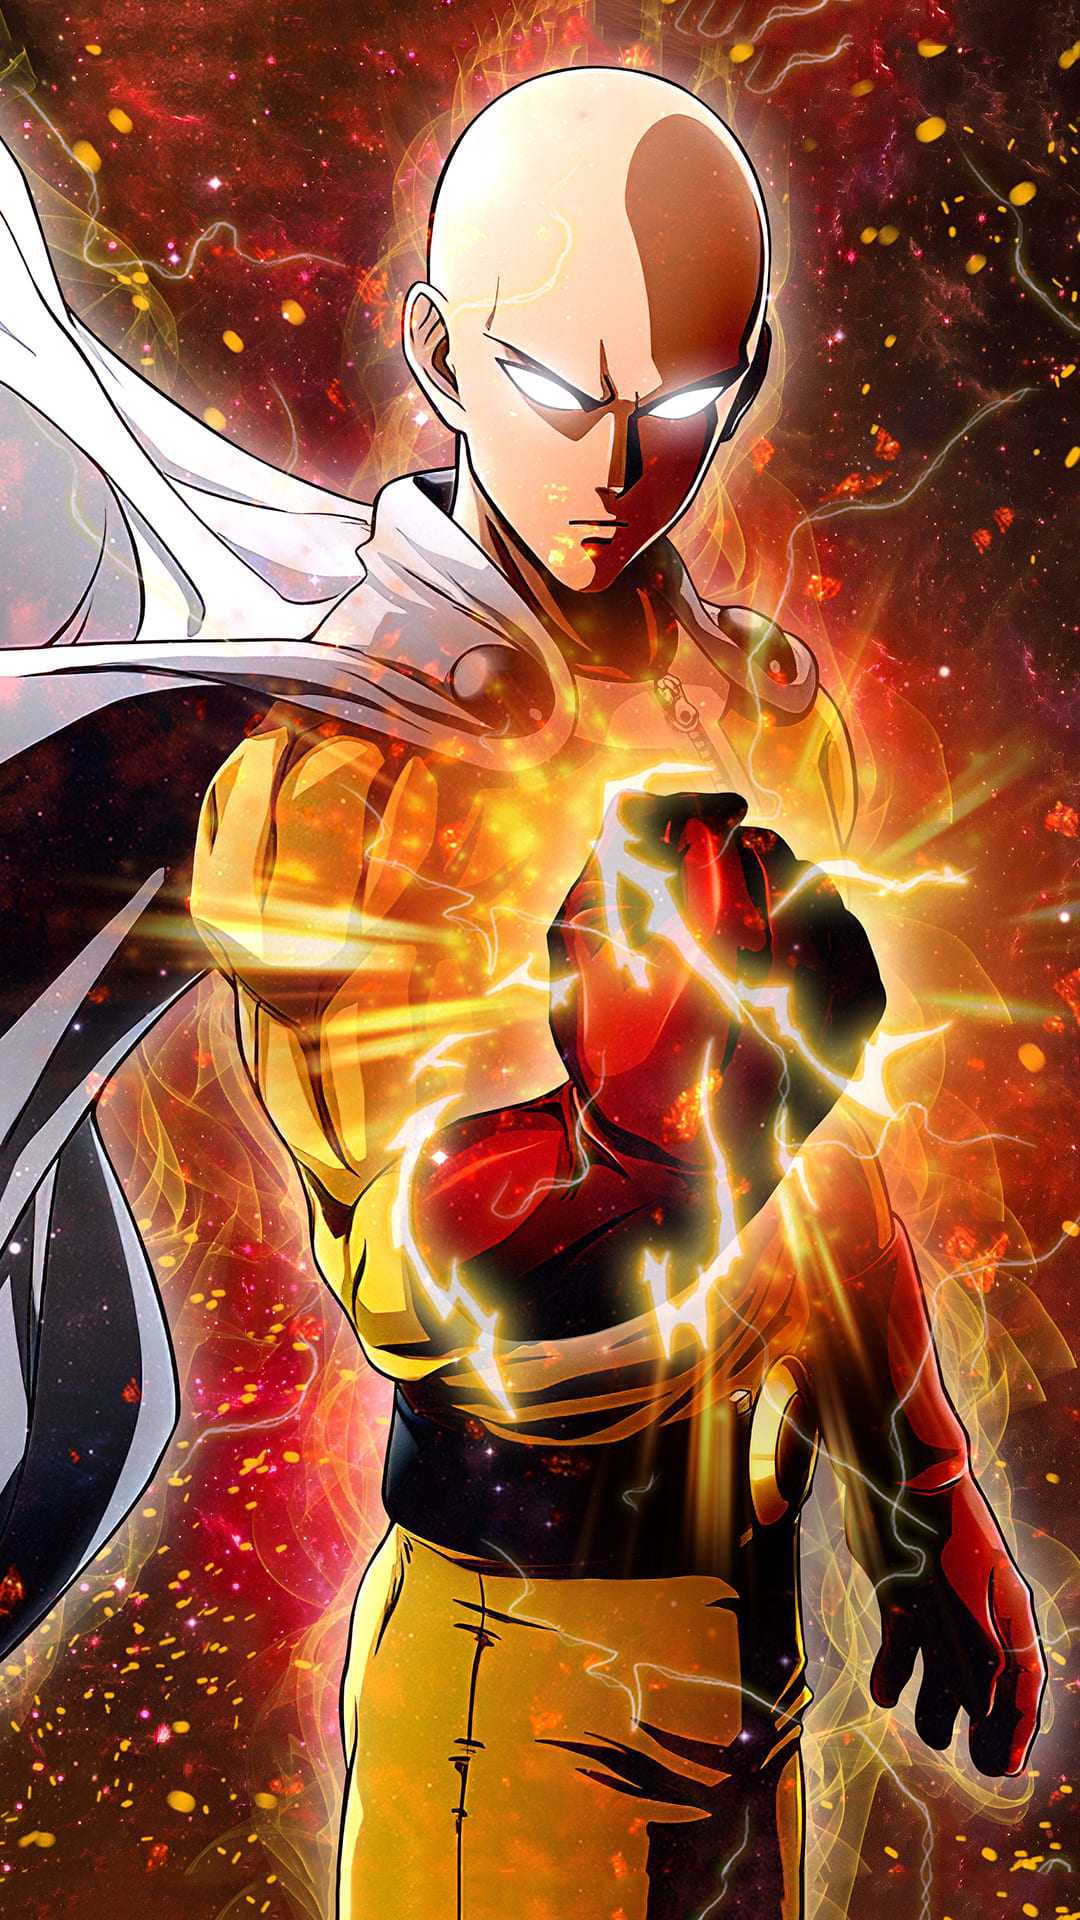 One Punch Man wallpapers for desktop, download free One Punch Man pictures  and backgrounds for PC